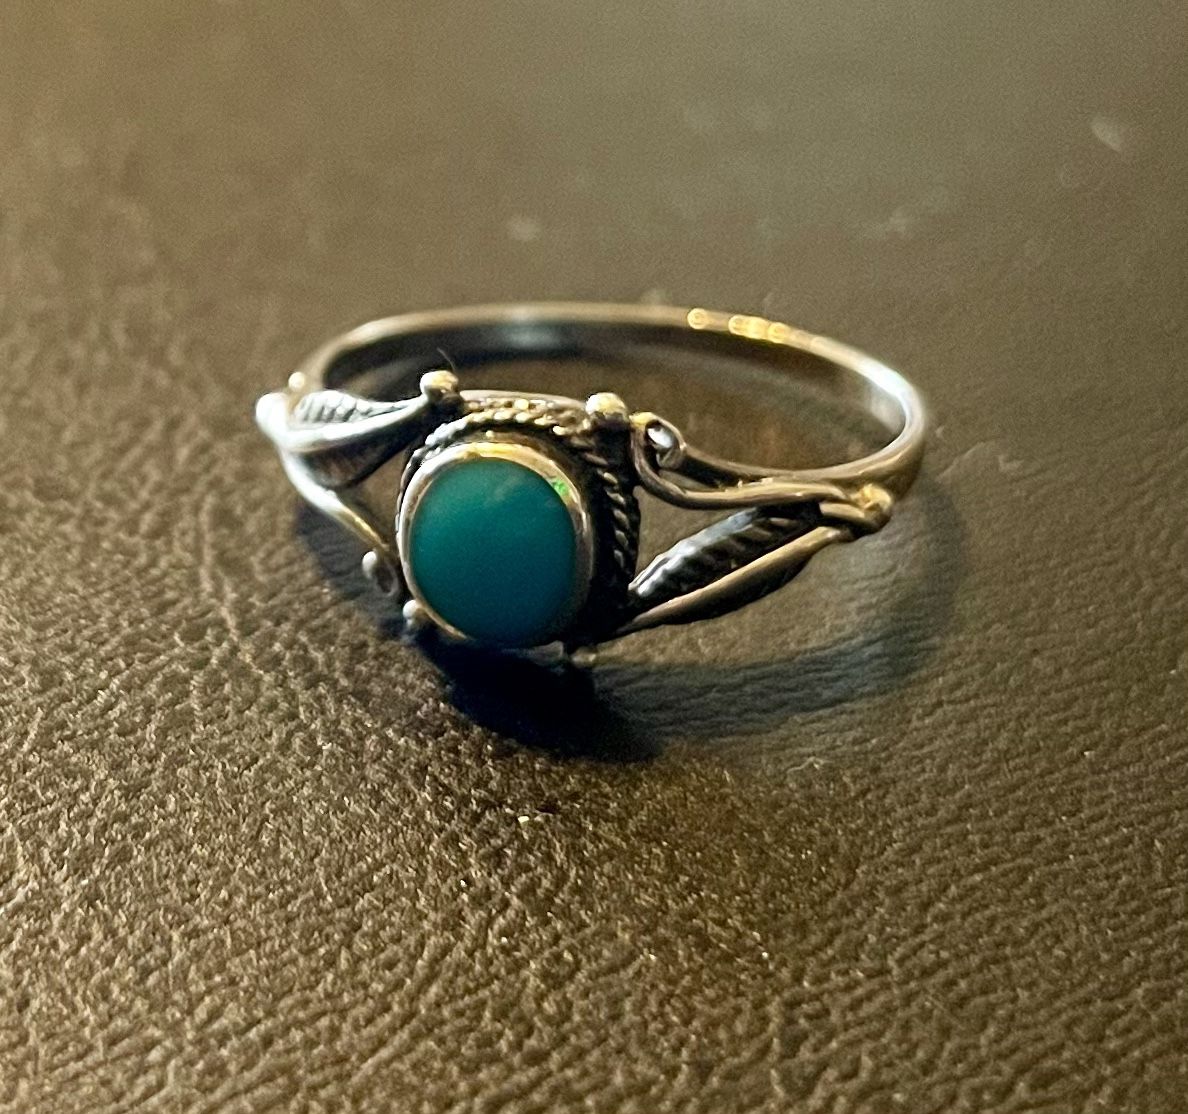 Turquoise And Sterling Silver Ring. Size 8